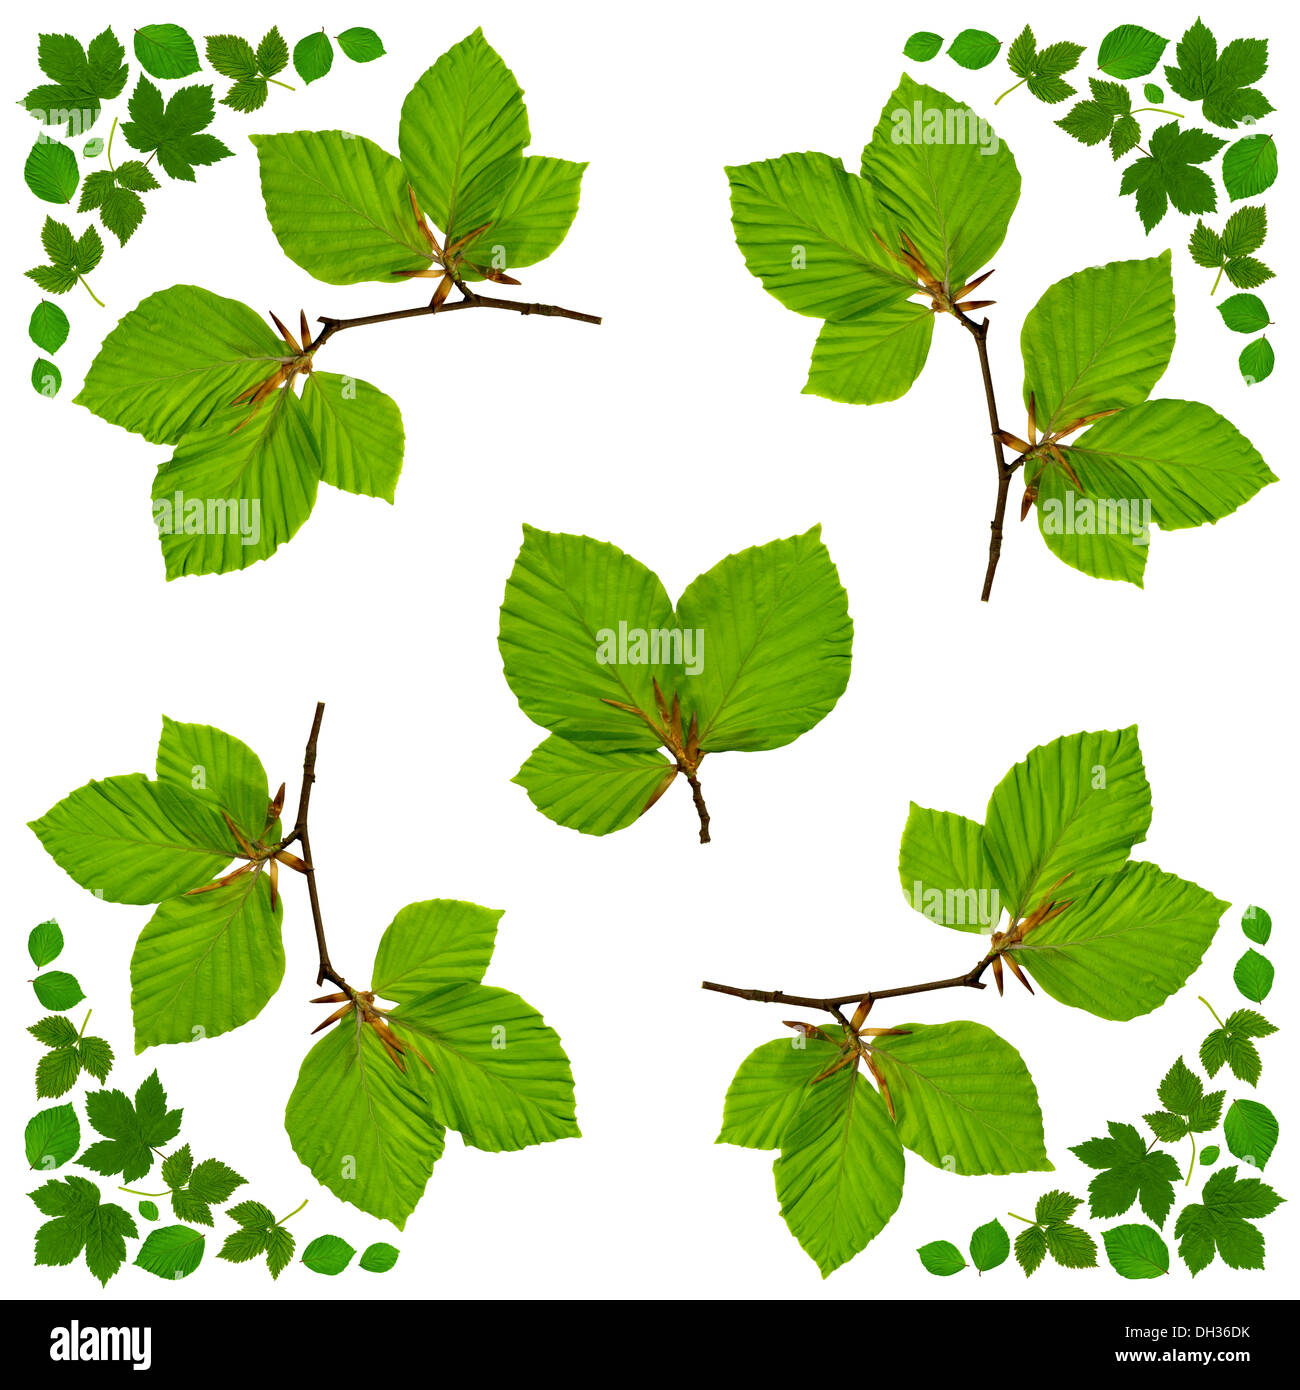 Napkin with green leaves Stock Photo